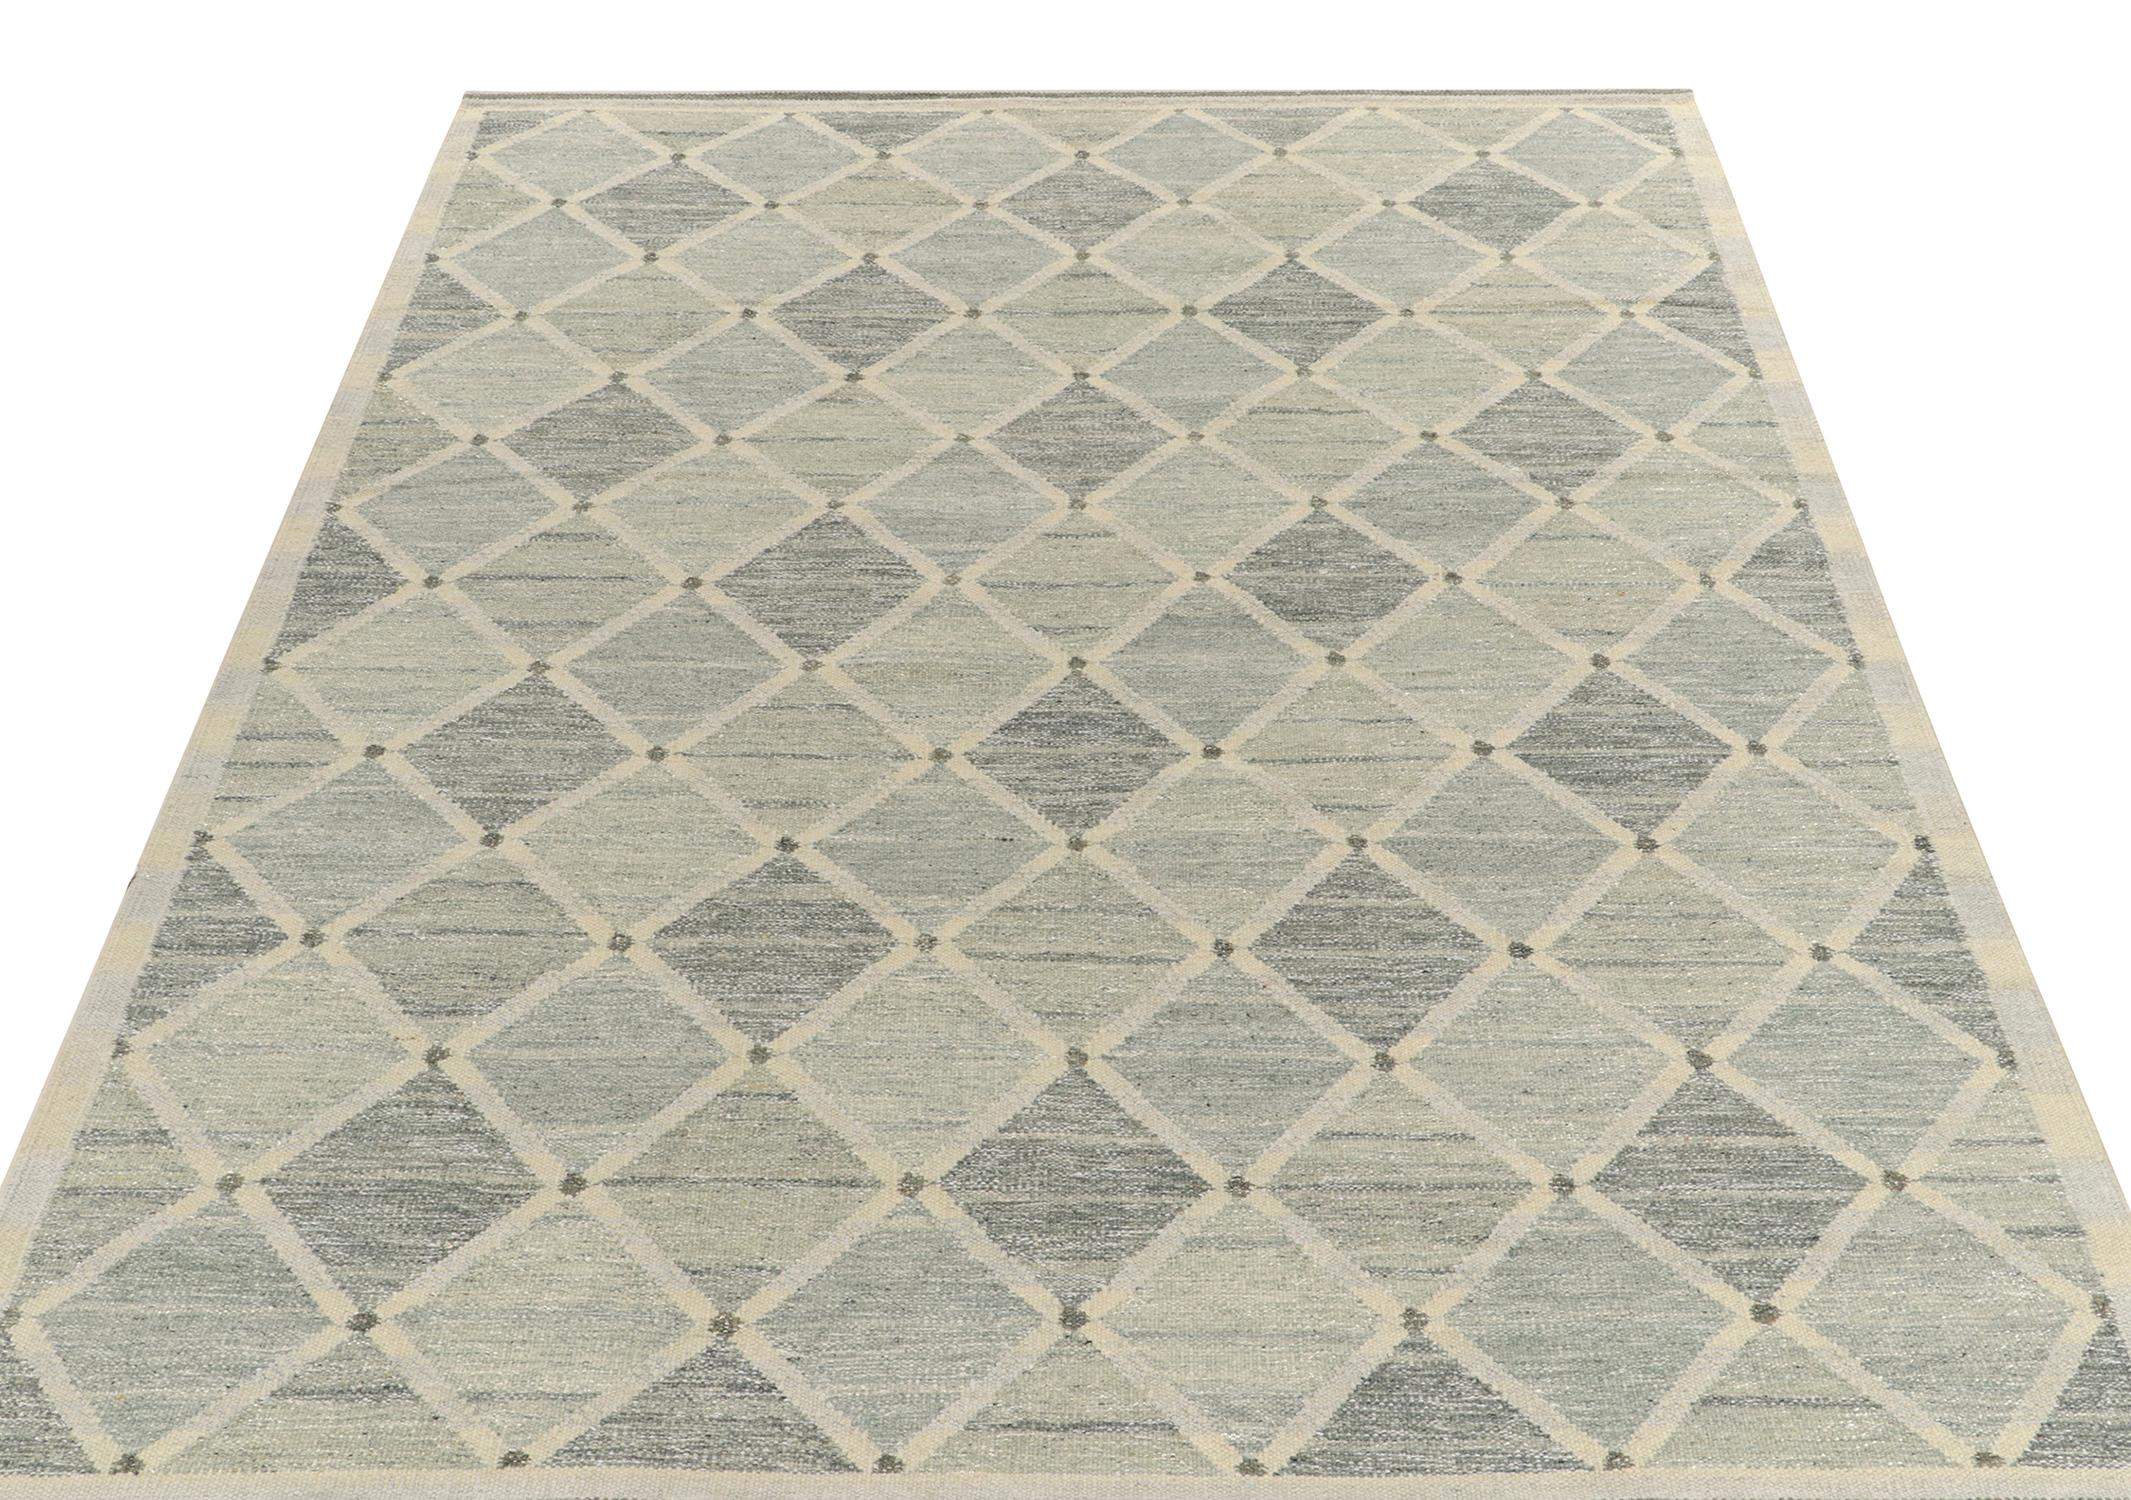 A 9x12 flat weave from Rug & Kilim’s Scandinavian Kilim Collection. The piece carries a cool composure with soothing tones of blue and gray covering the scale with a clean & classic abrashed look. The alluring texture beautifully accompanying the